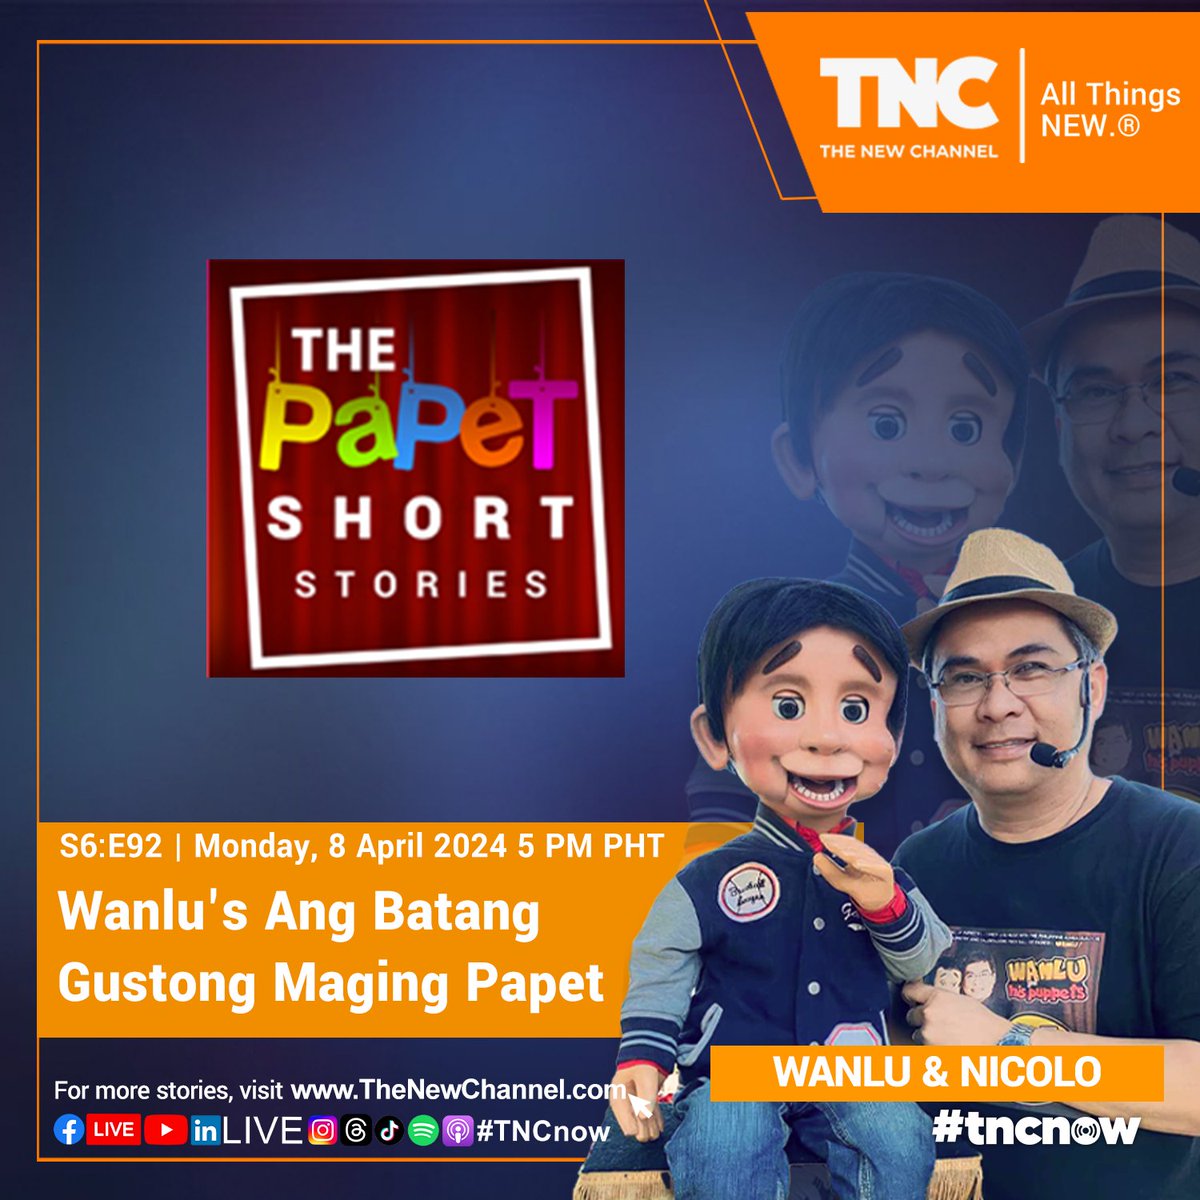 Watch S6:E92 | Wanlu's Ang Batang Gustong Maging Papet | The Papet Short Stories with Tito Wanlu and Nicolo

📌 YouTube (best to watch via your smart TV) - bit.ly/ThePapetShortS…

#onTNC #TNCnow #ThePapetShortStoriesOnTNC #TitoWanlu #WanluLunaria #Nicolo #FYP #ForYouPage